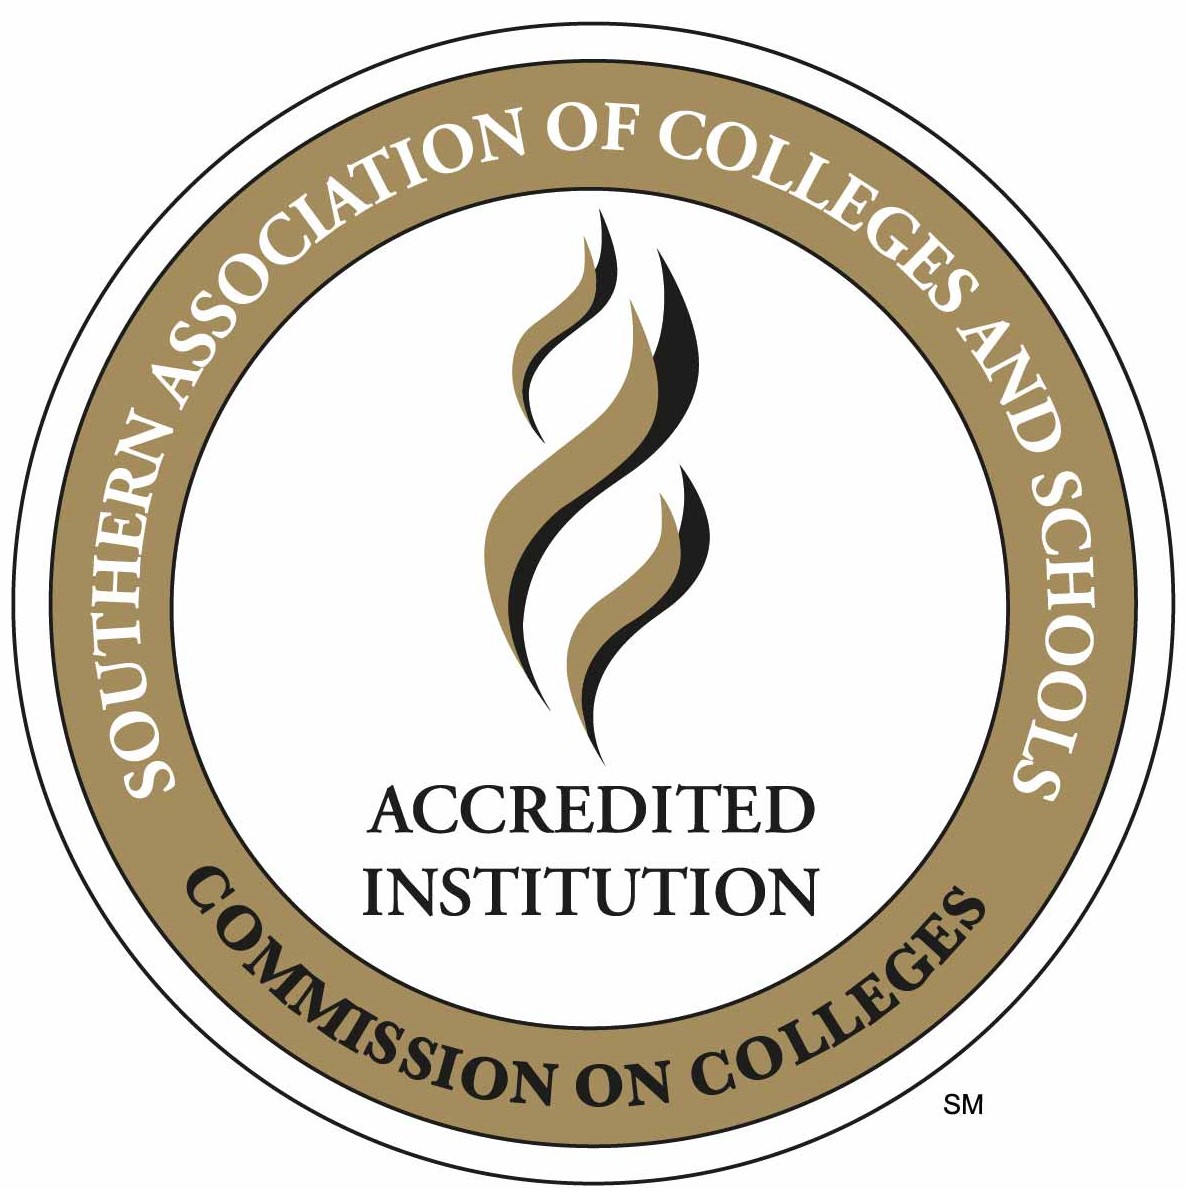 Southern Association of Colleges and Schools Commission on Colleges (SACSCOC)